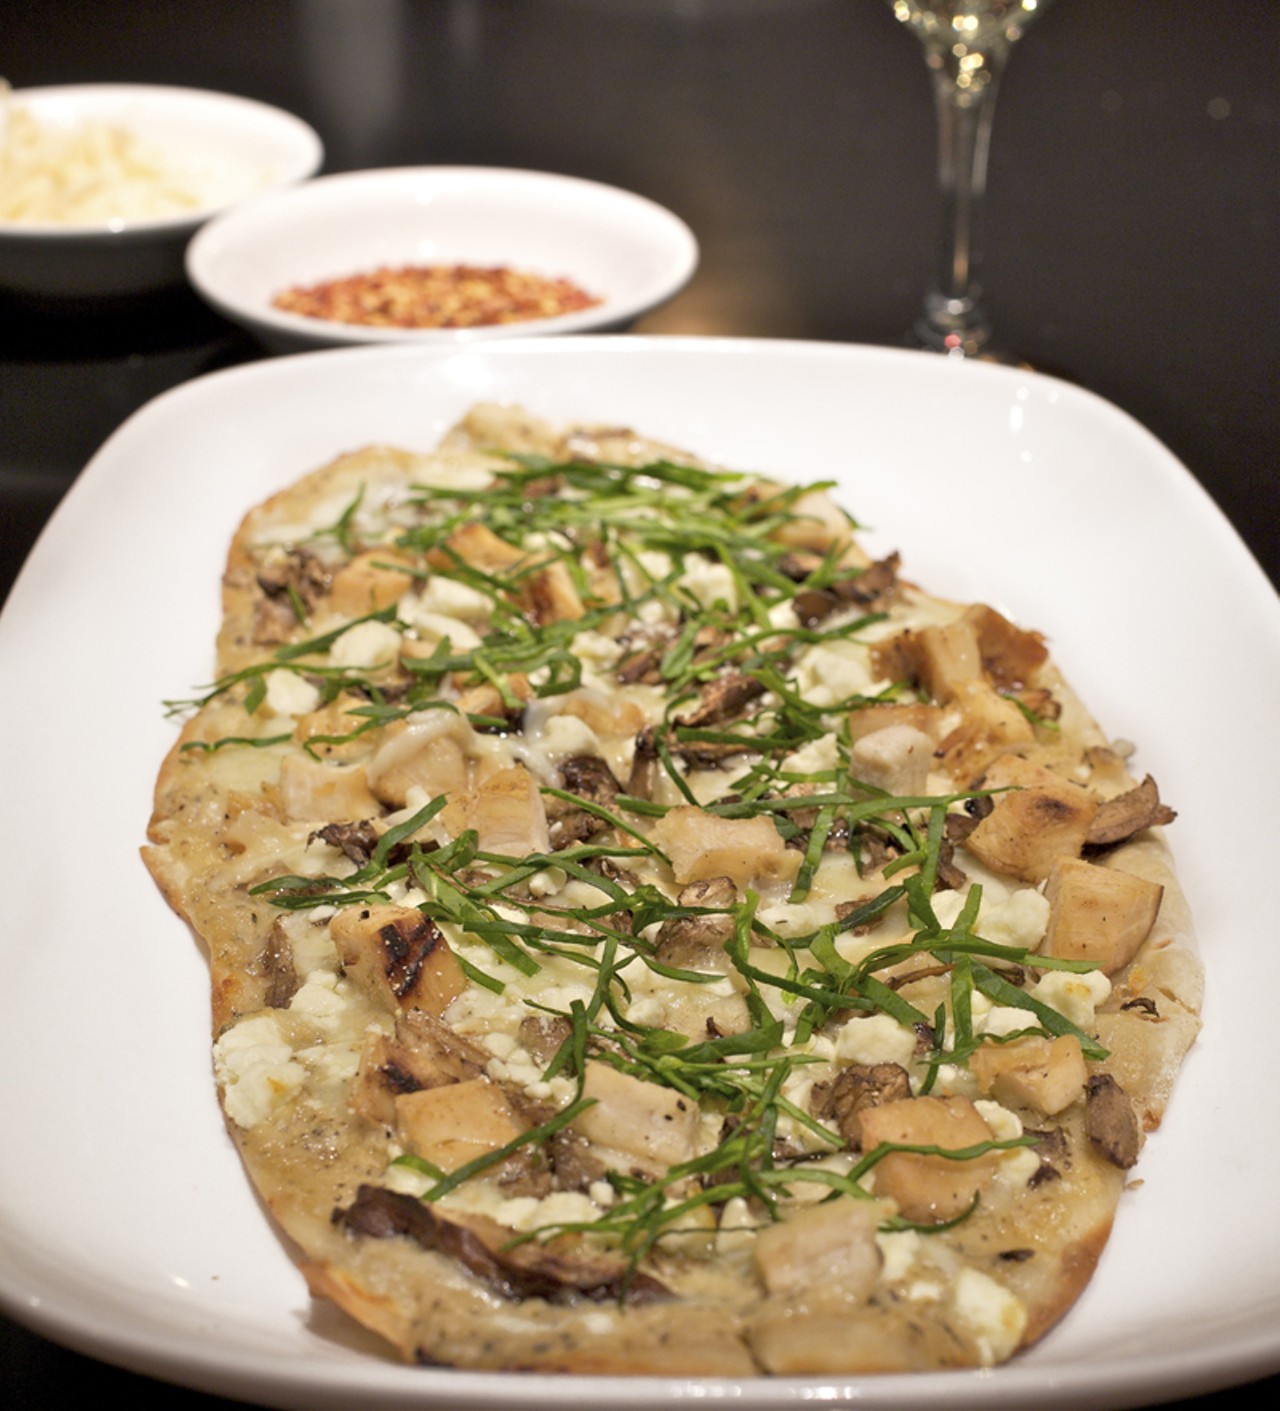 One of four flatbreads on the menu, the White chicken flatbread is served with grilled rosemary chicken, wild mushrooms, spinach and Feta cheese.